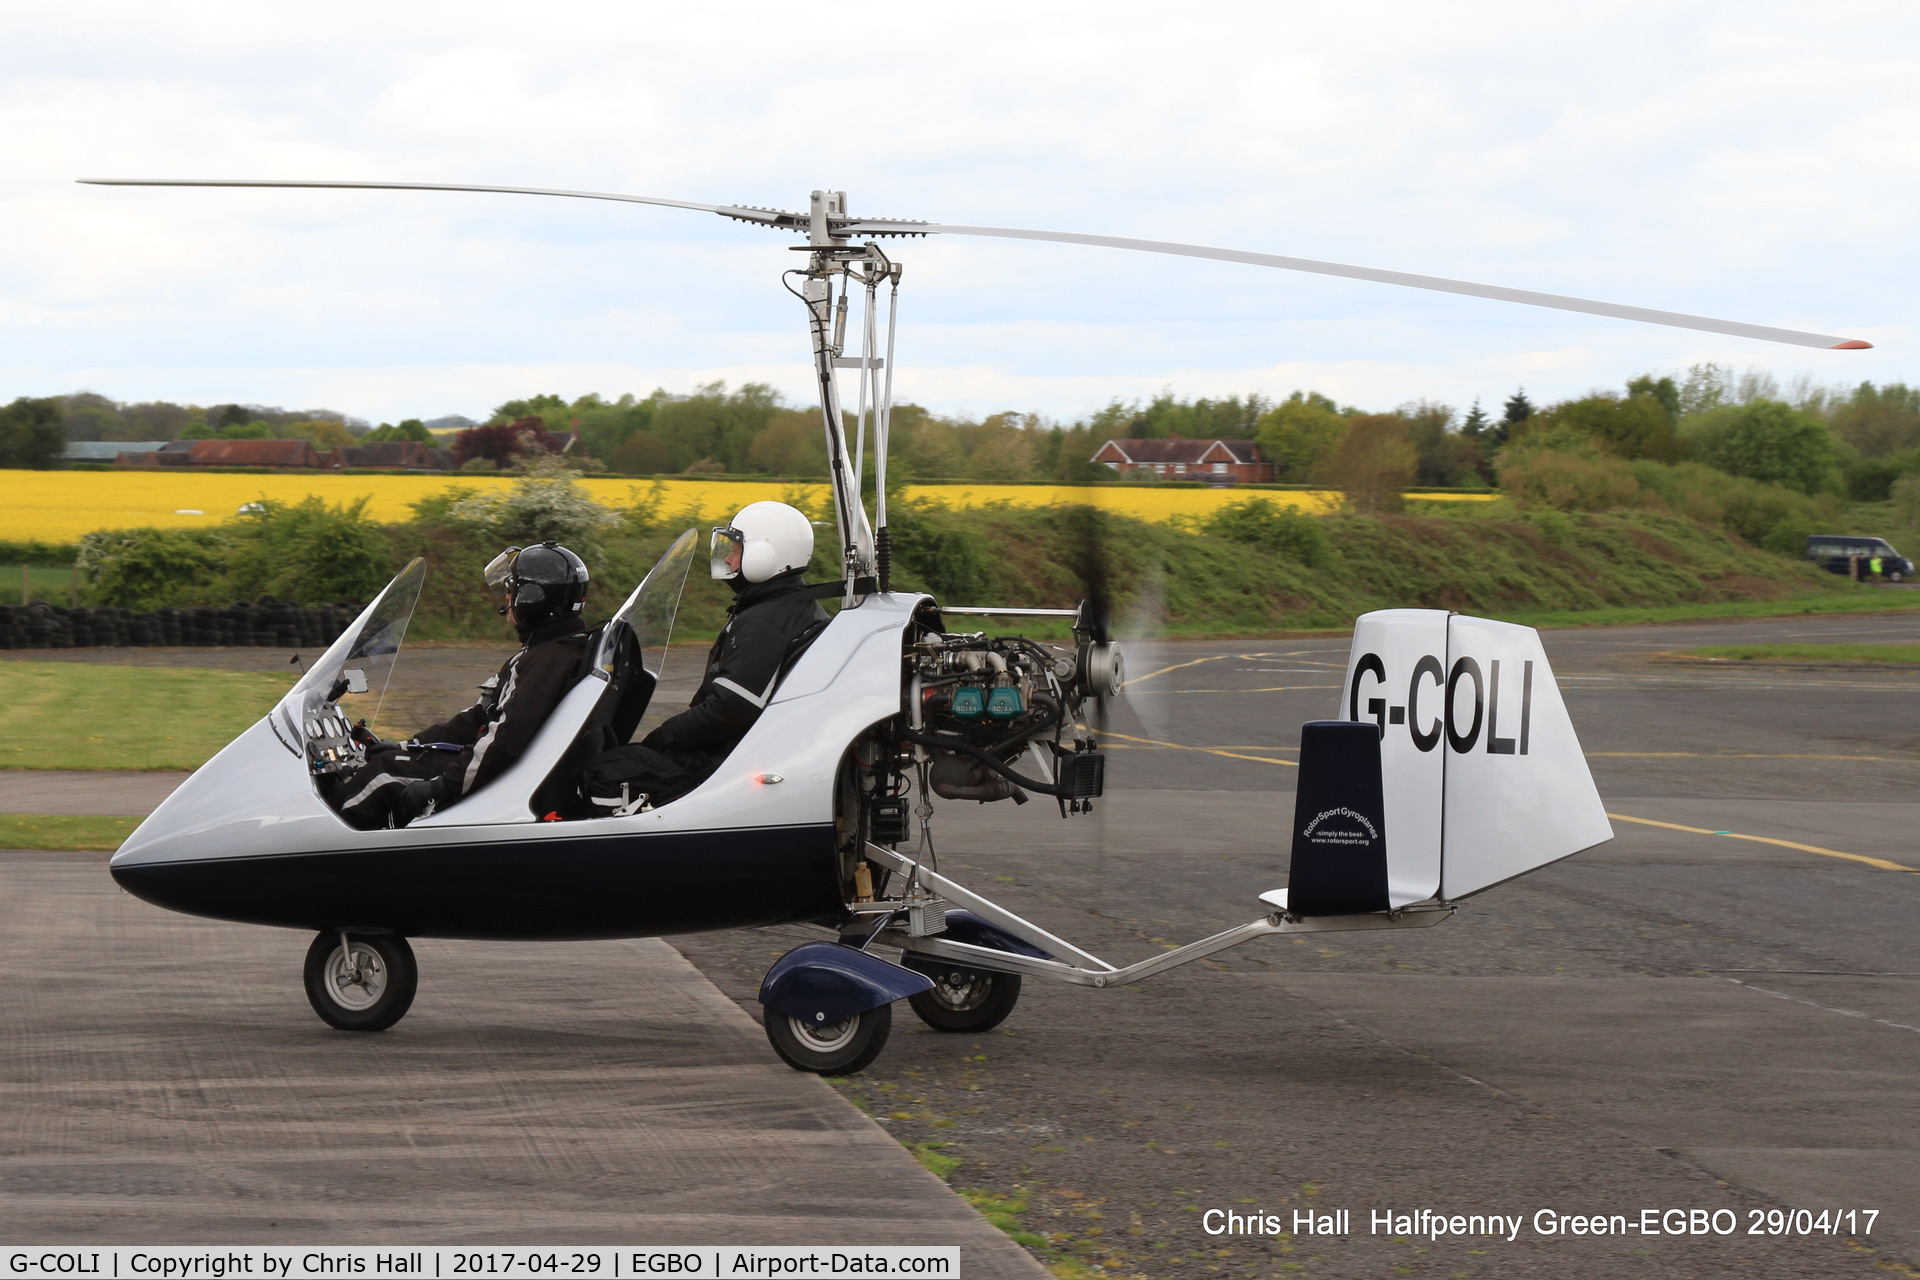 G-COLI, 2008 Rotorsport UK MT-03 C/N RSUK/MT-03/037, at the Radial & Trainer fly-in